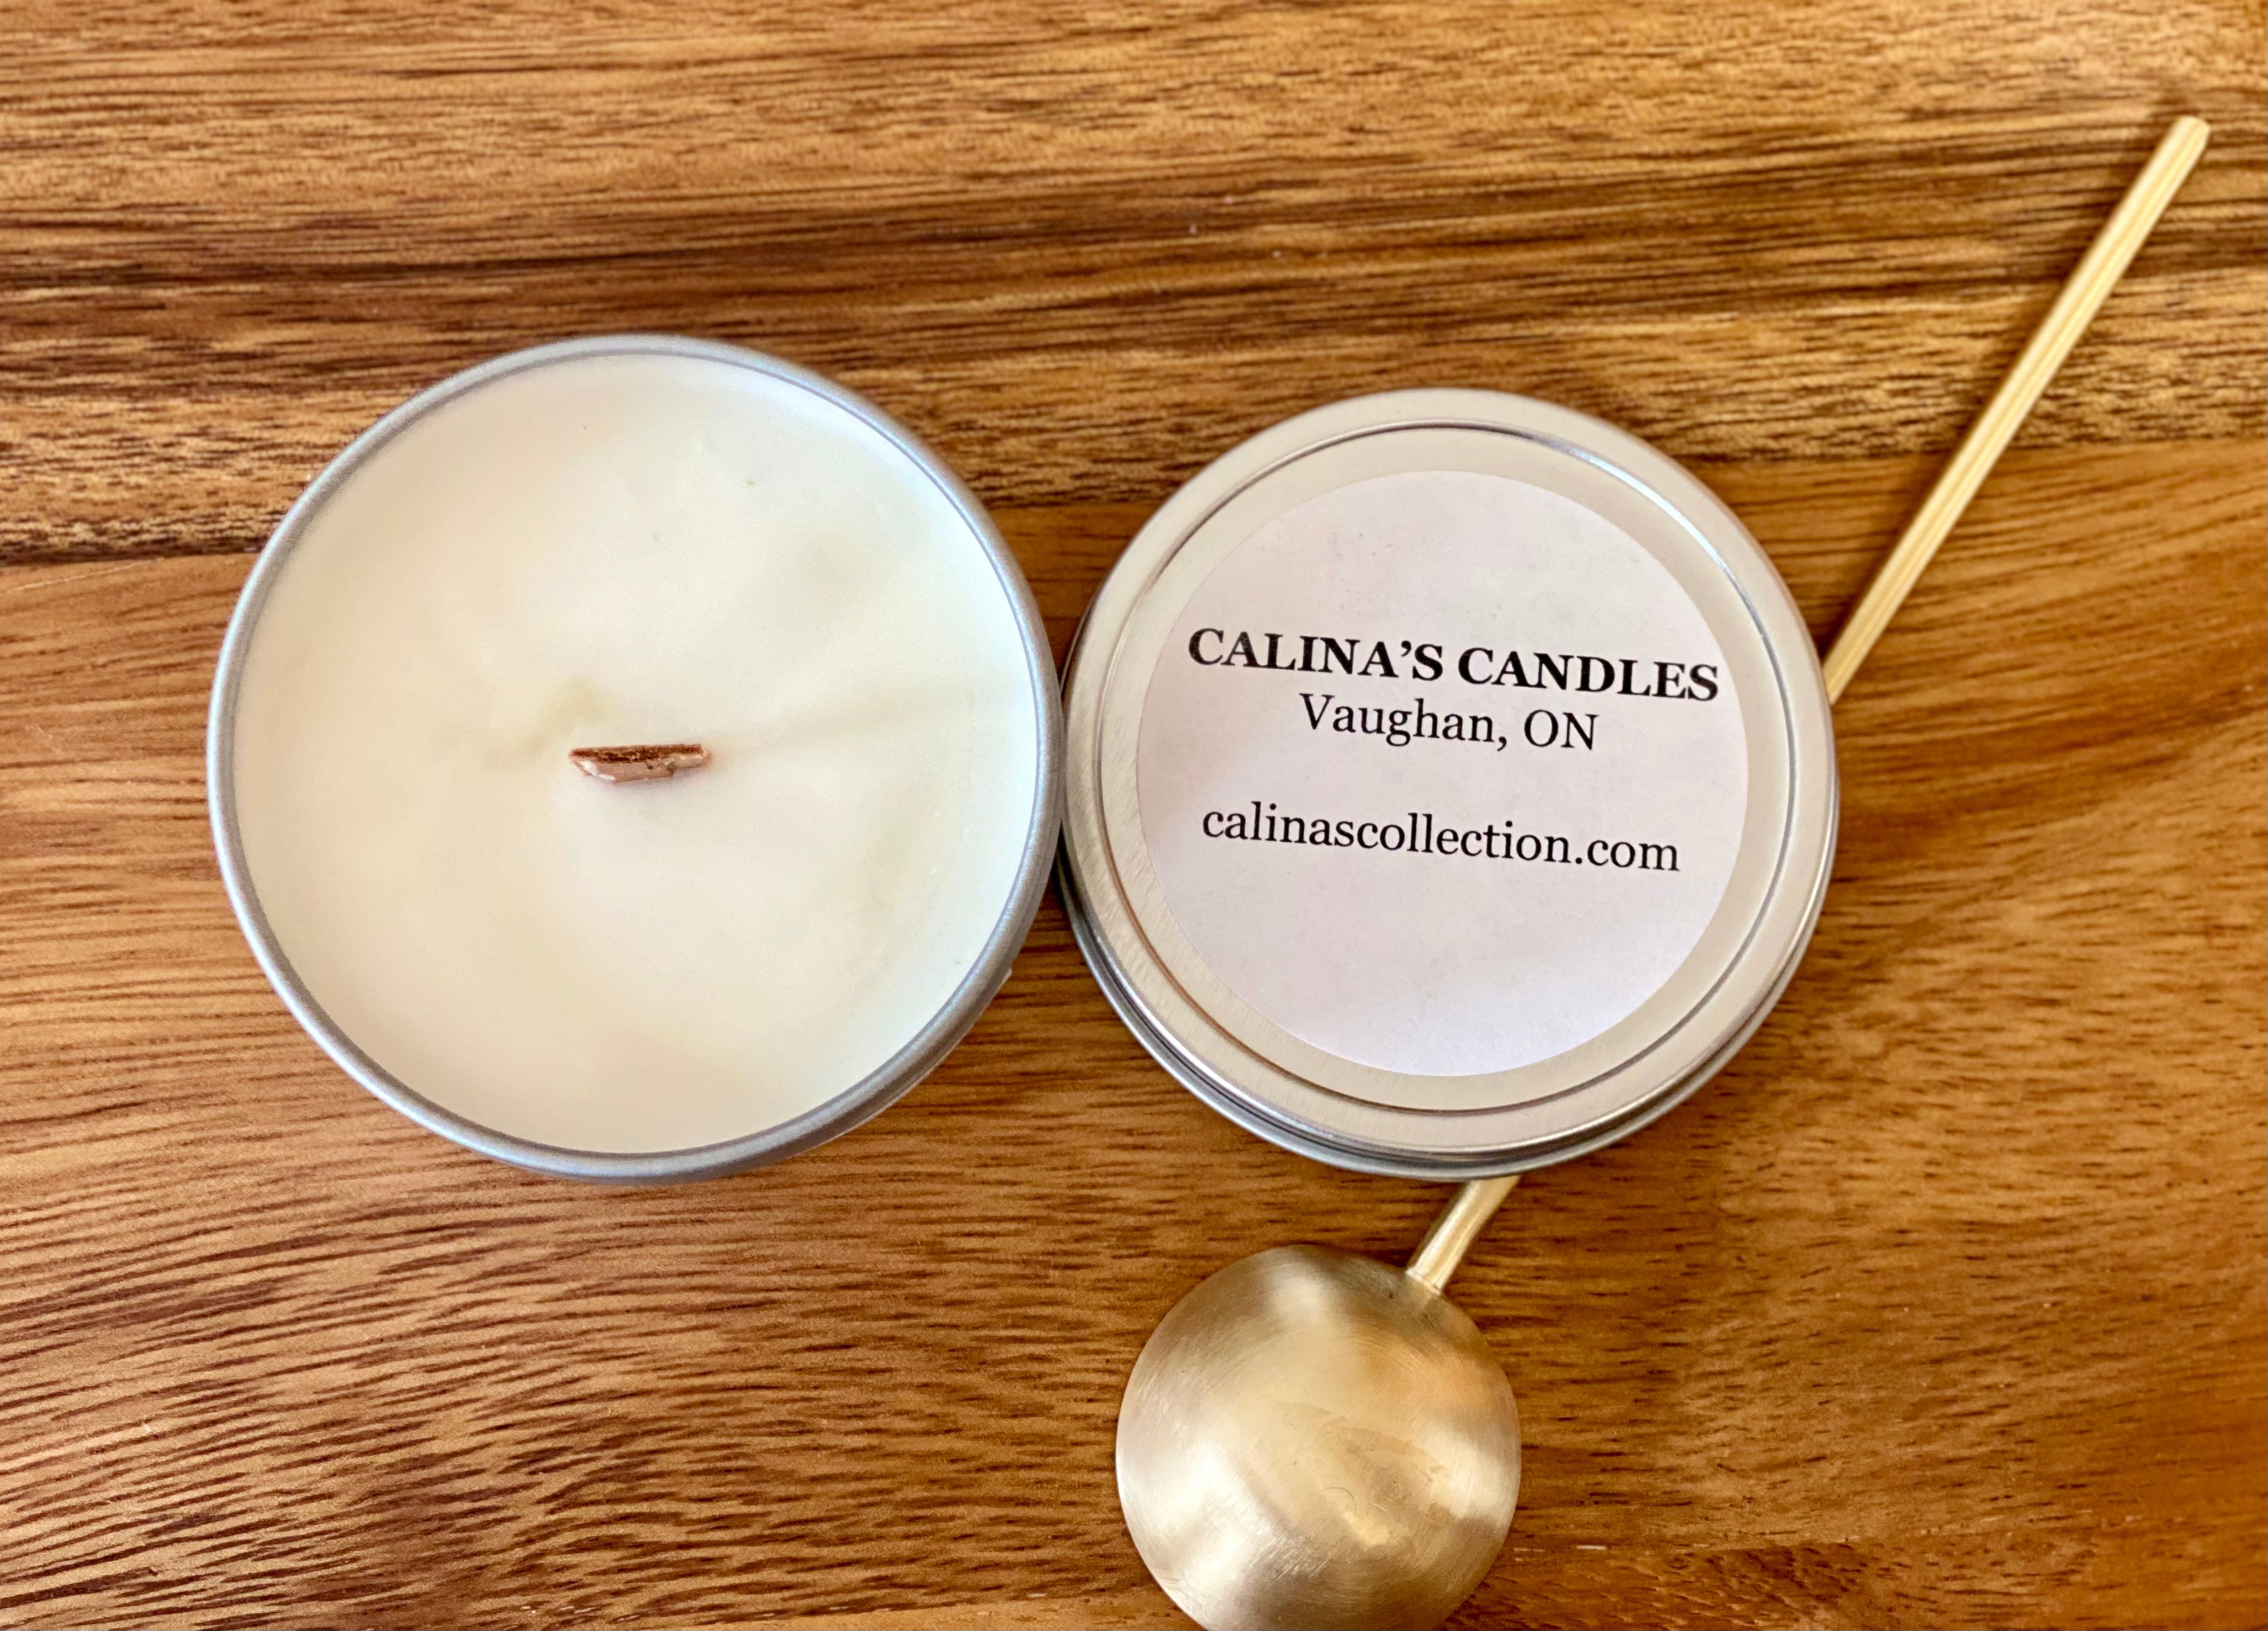 Eucalyptus Spearmint | Scented Tin Candle | Wooden Wick